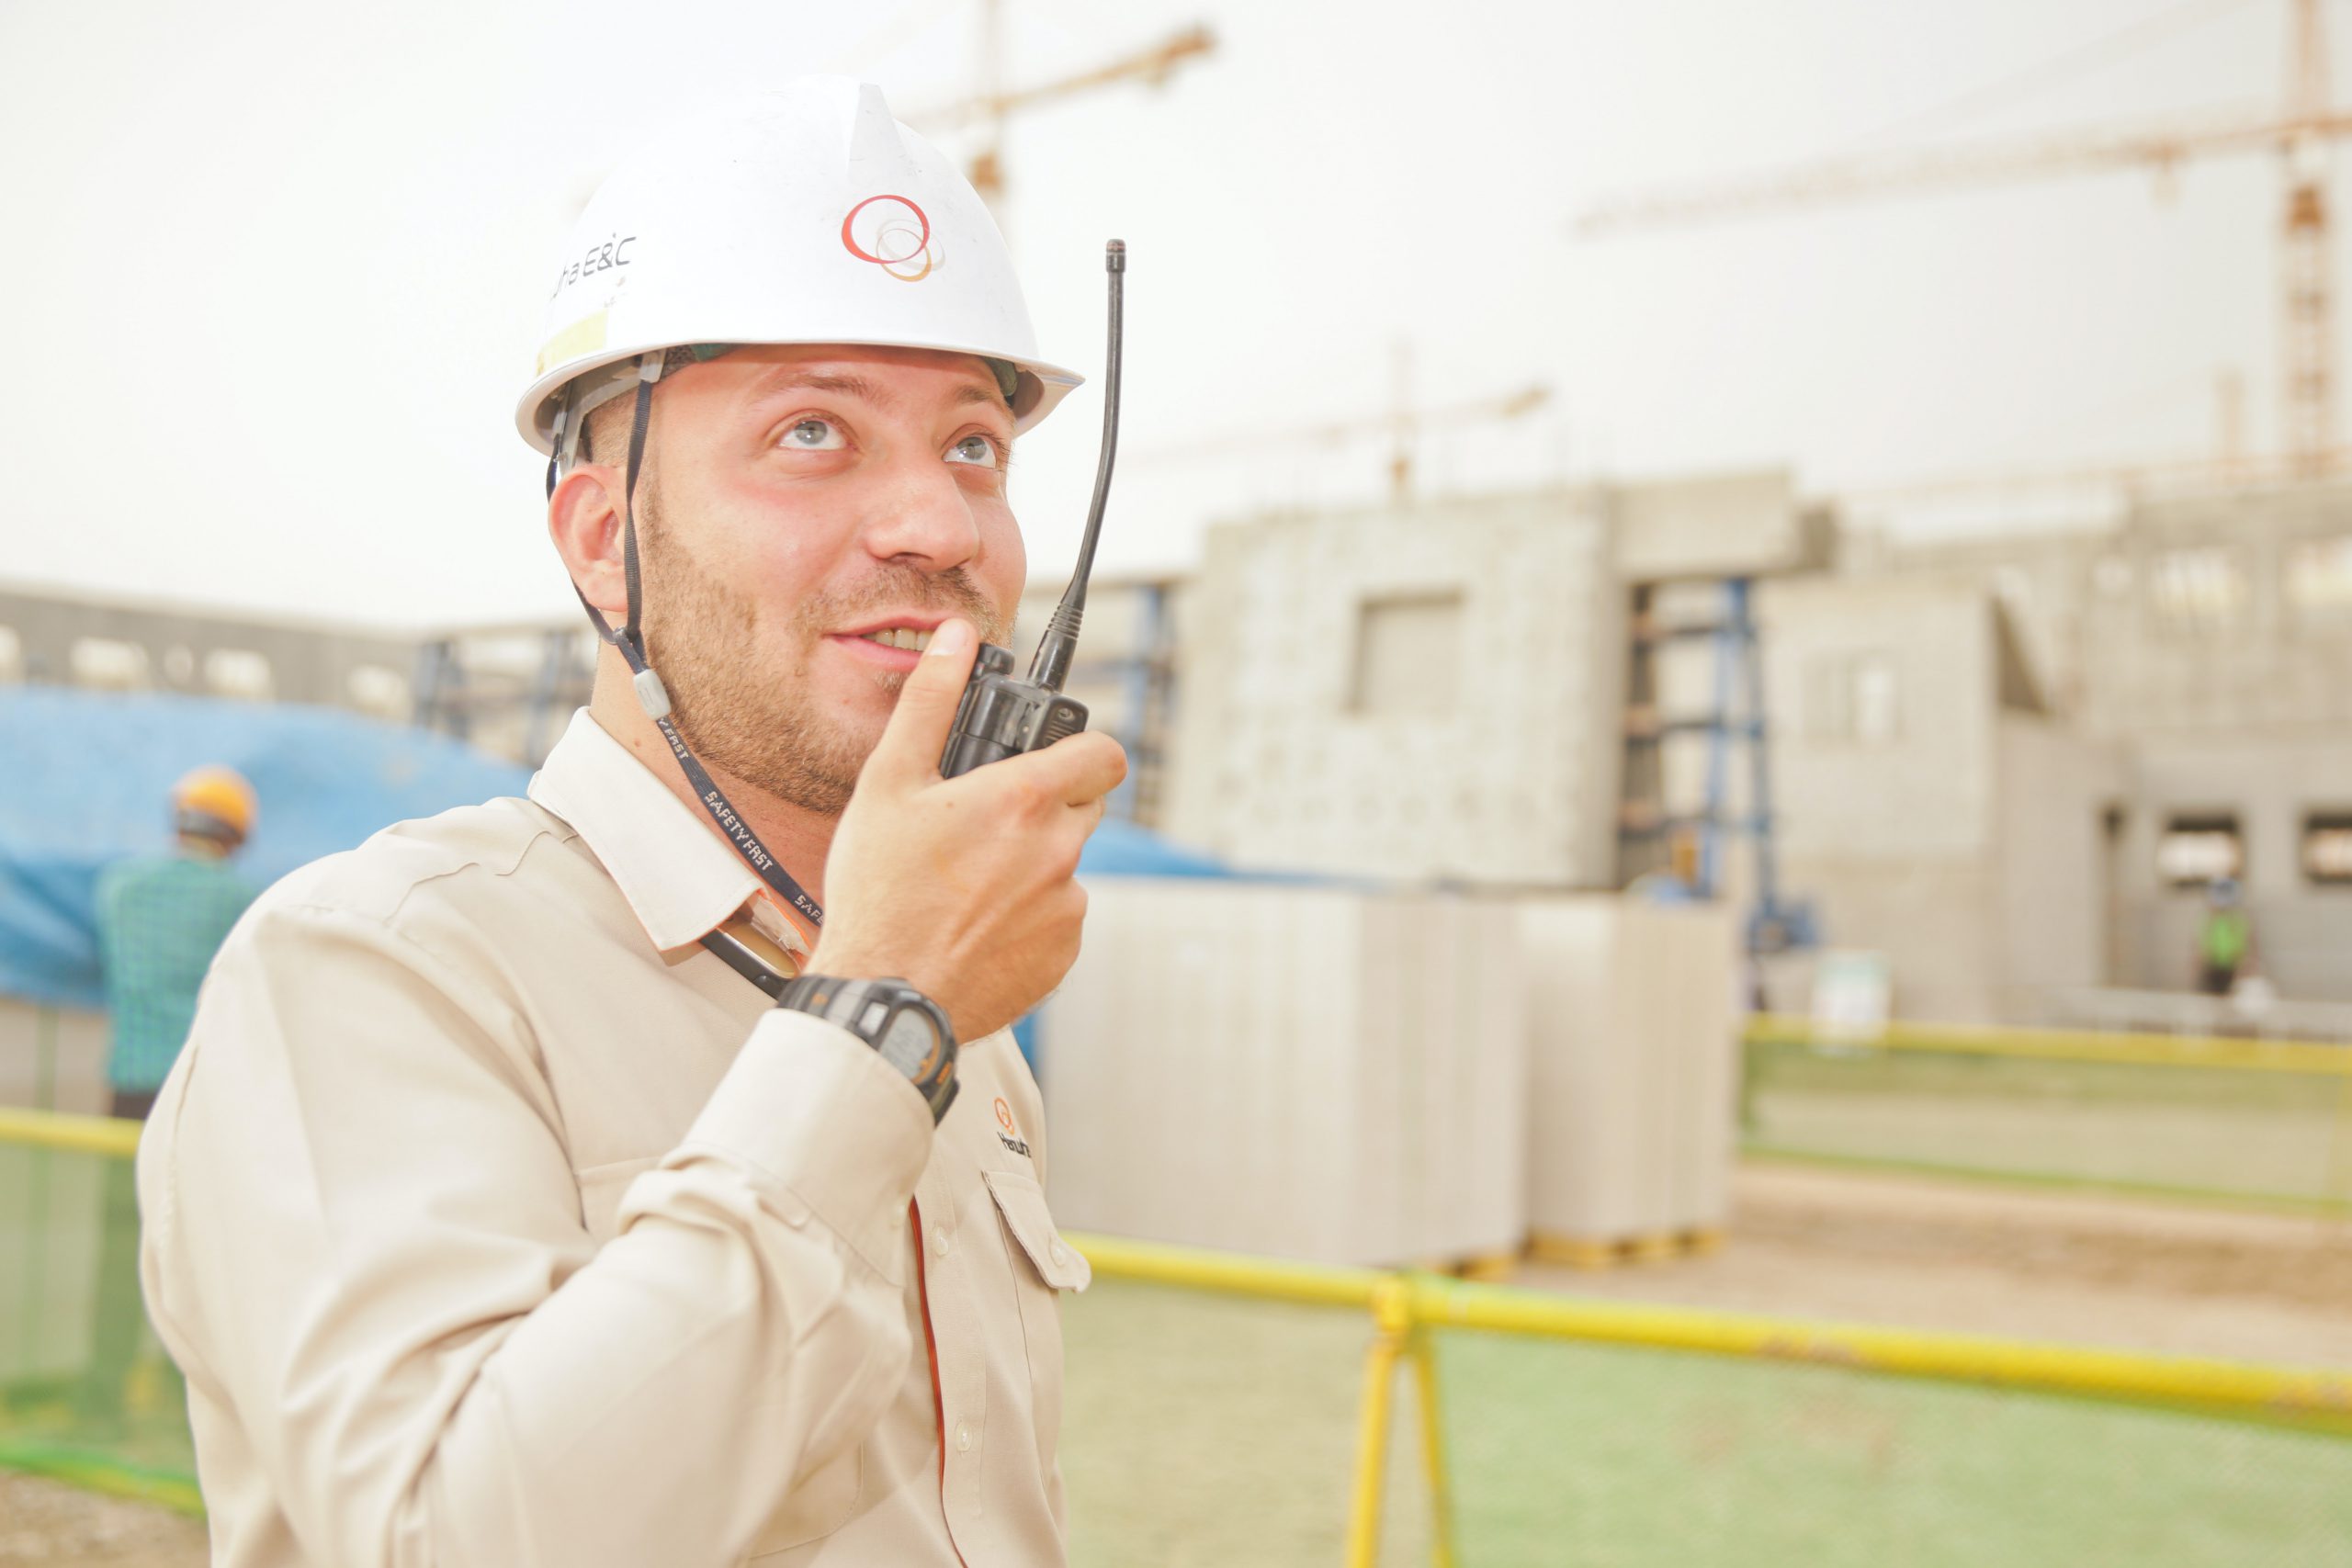 Project manager wearing a hardhat talking into handheld radio while looking onto a project.